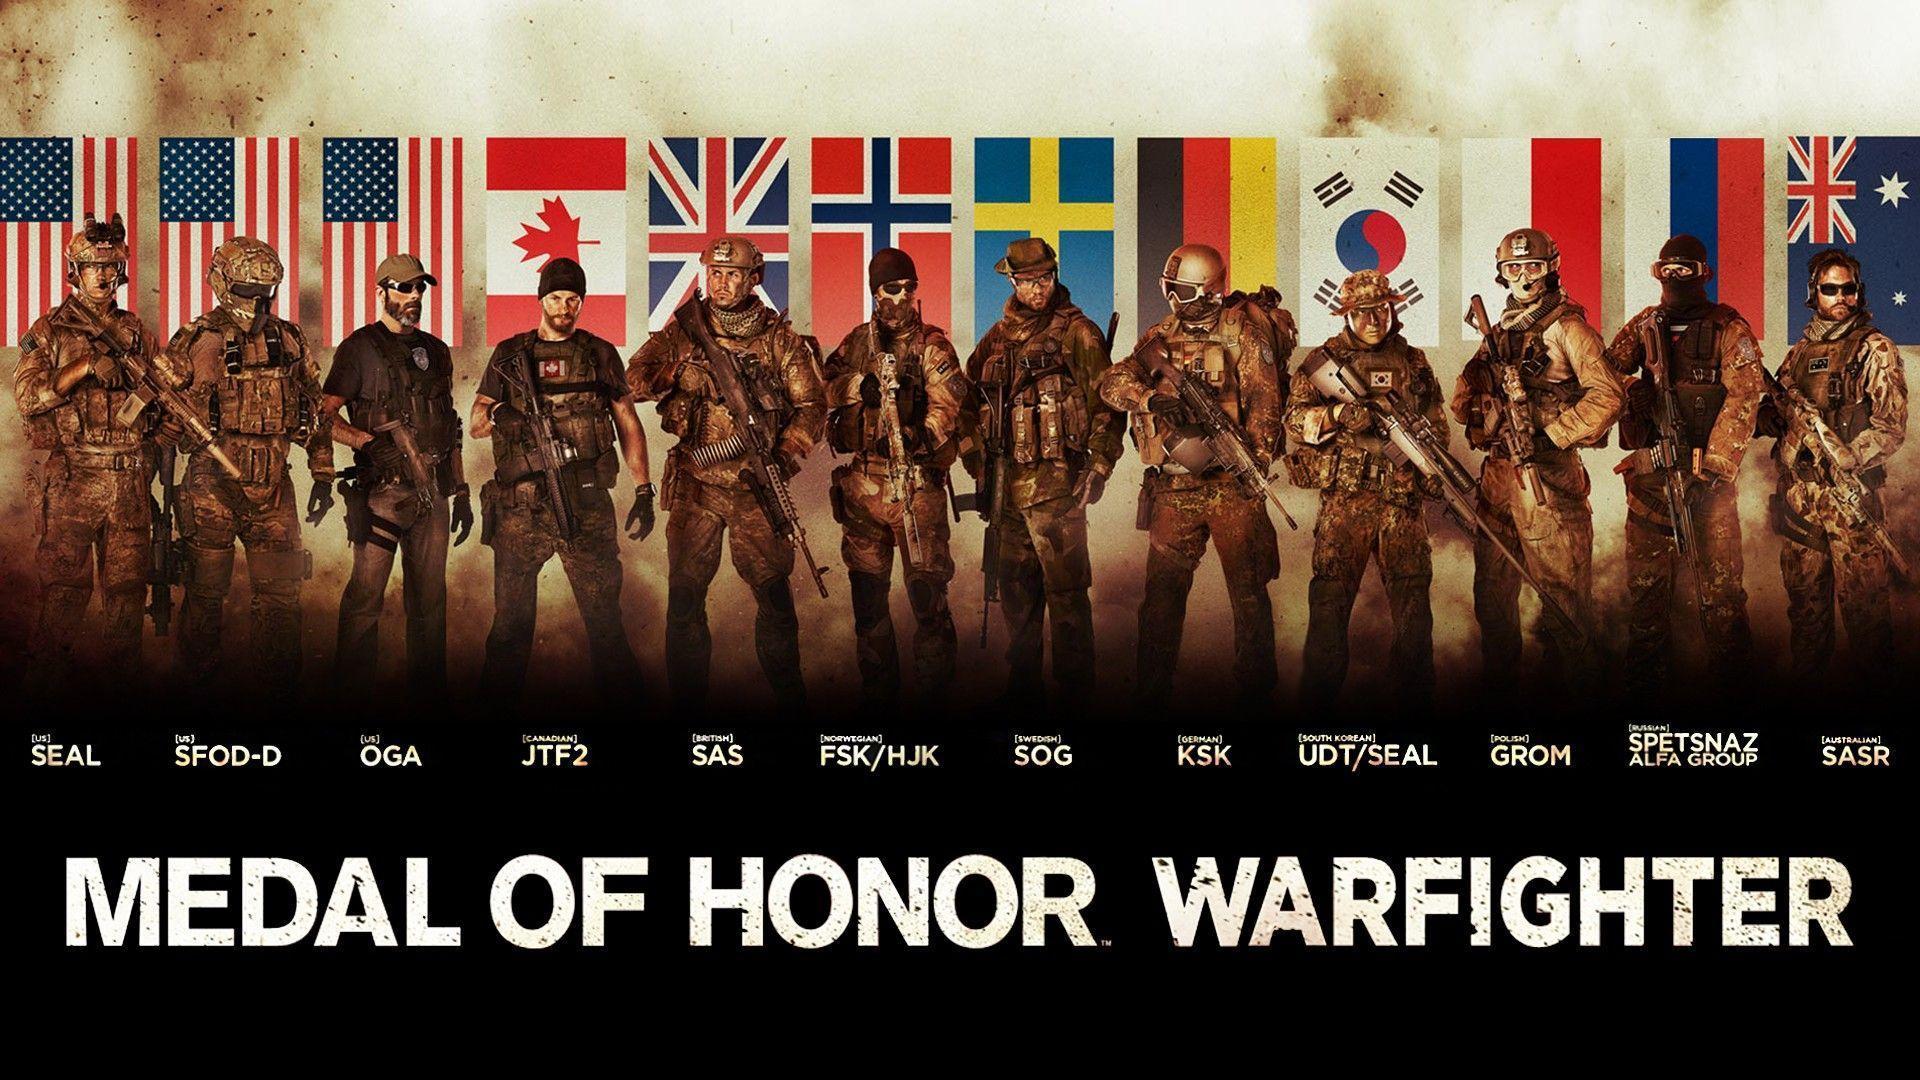 Medal of Honor Warfighter Tier 1 Special Forces Wallpaper. HD